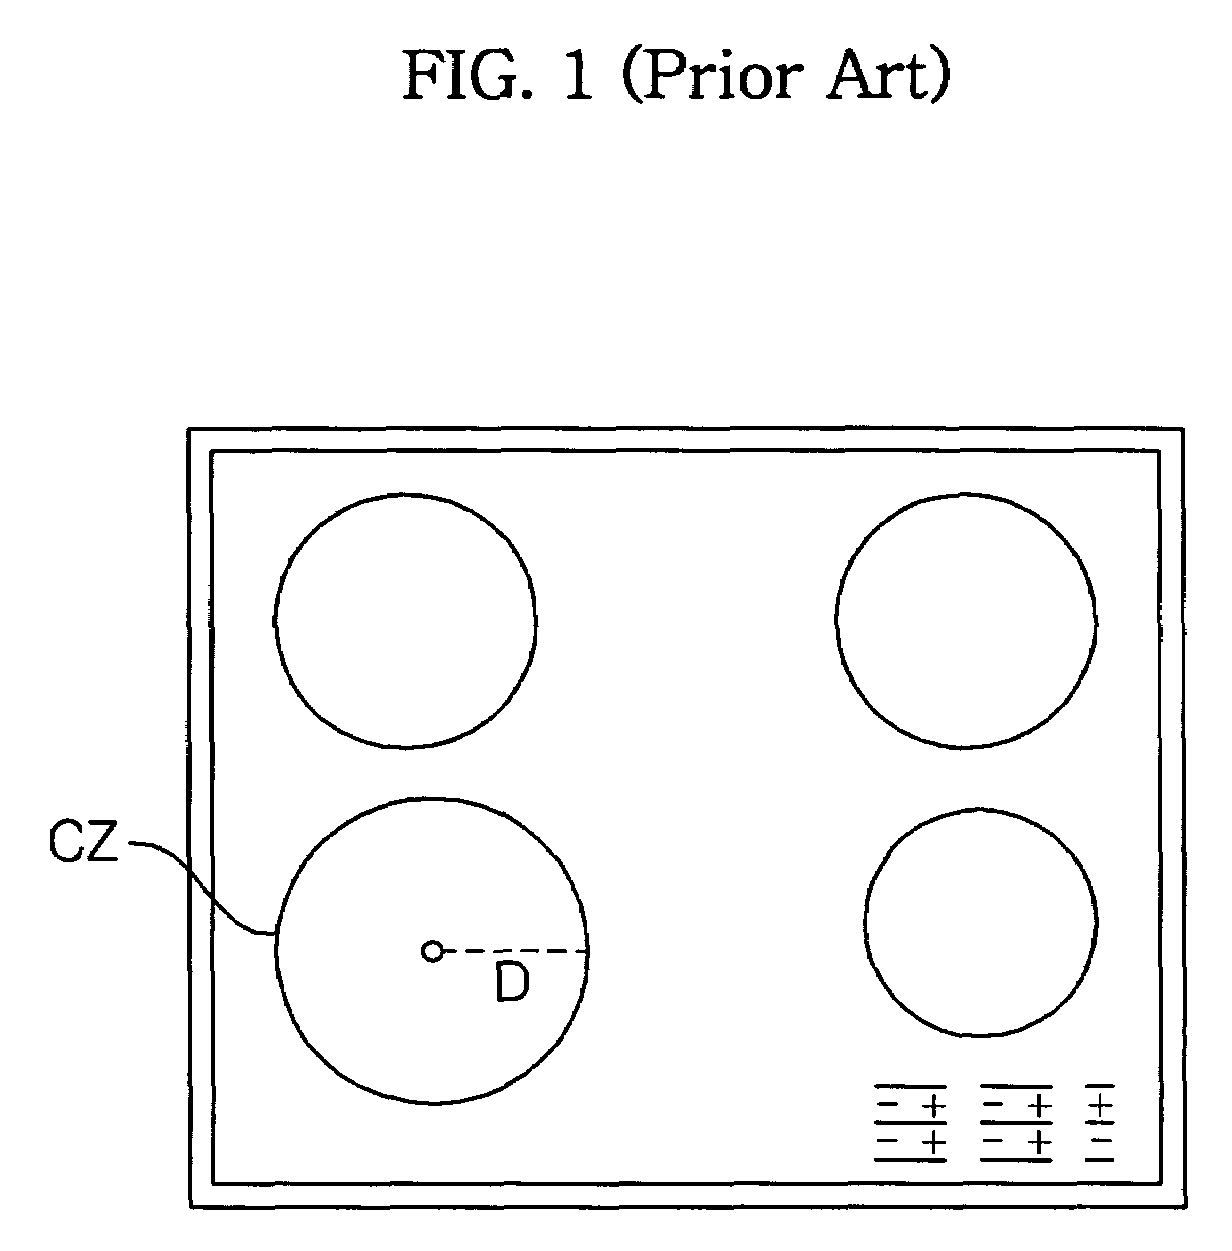 Induction heating cooking apparatus, operation of which is interrupted by container eccentricity